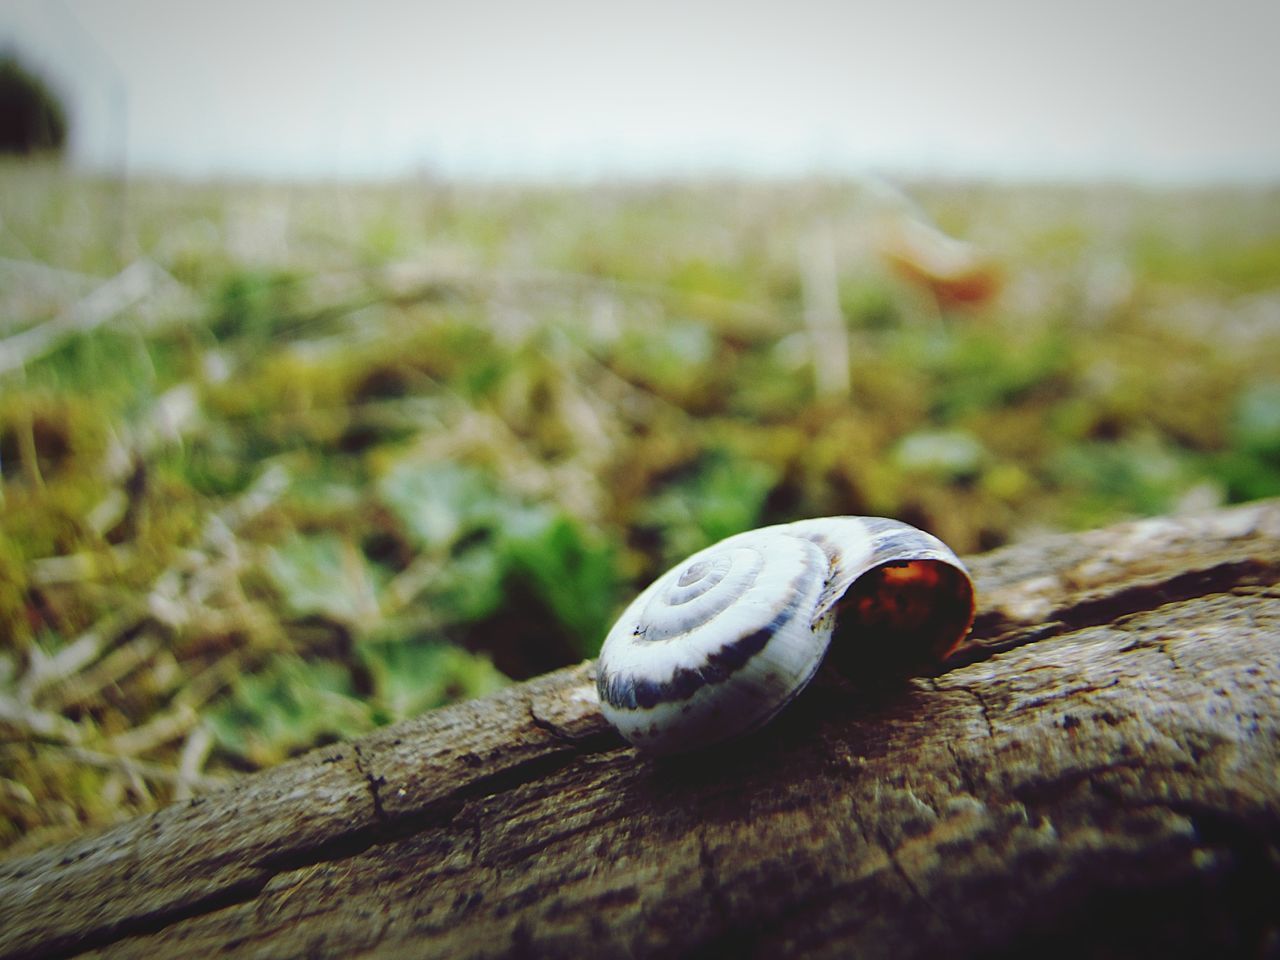 animal themes, one animal, close-up, nature, outdoors, insect, animals in the wild, no people, day, fragility, gastropod